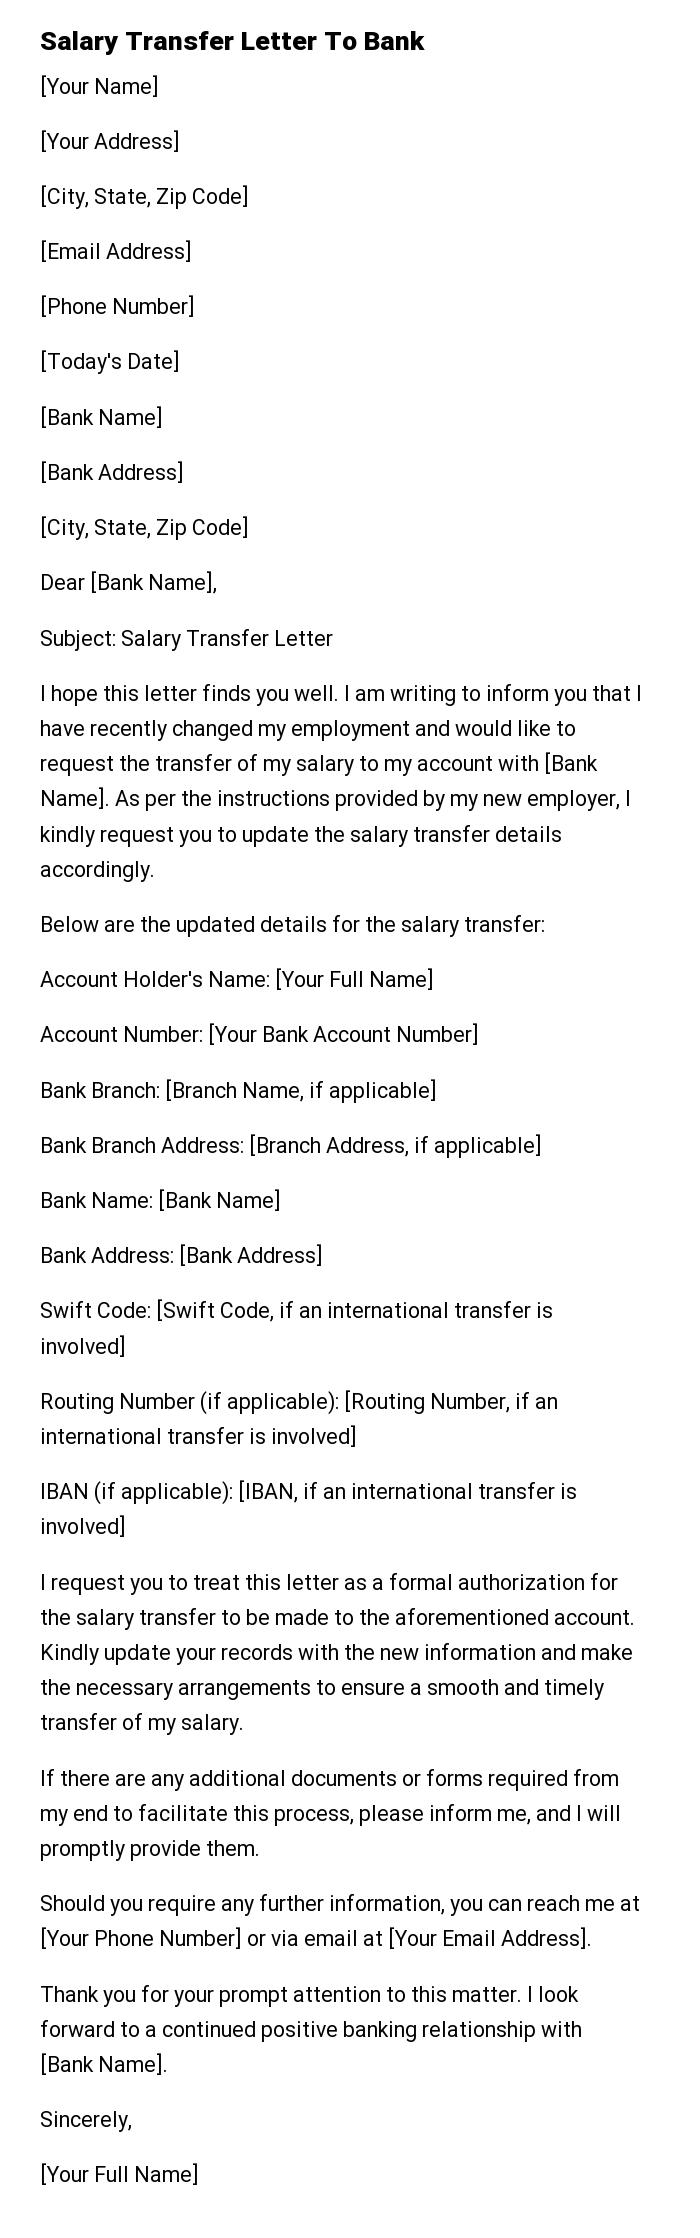 Salary Transfer Letter To Bank